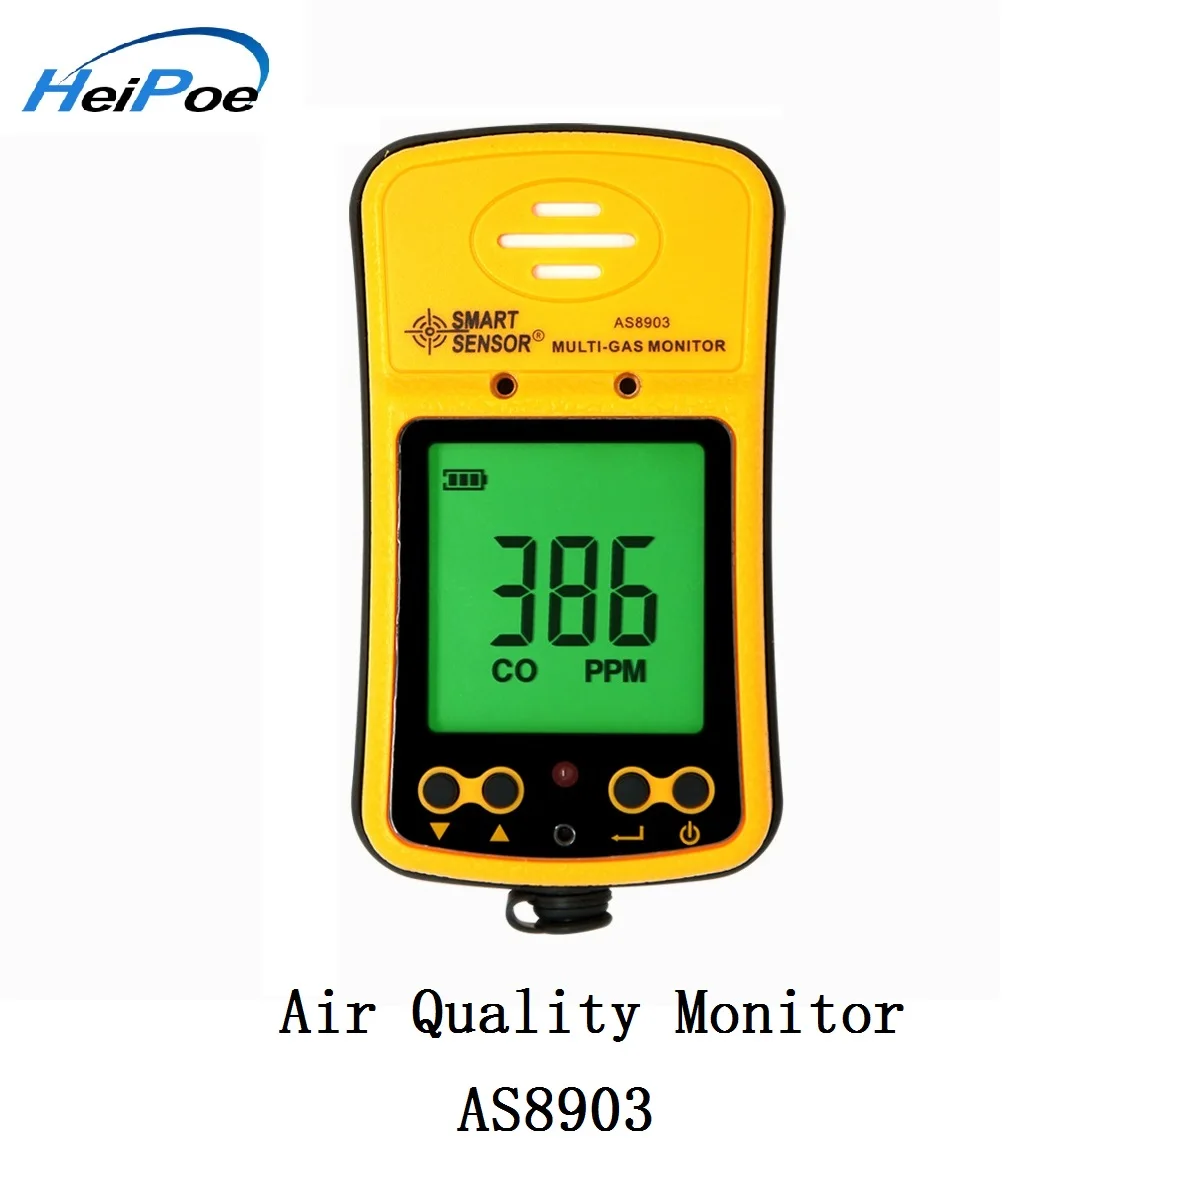 Oxygen Hydrothion H2S Carbon Monoxide CO Combustible Gas 4 in1 Detector Monitor 